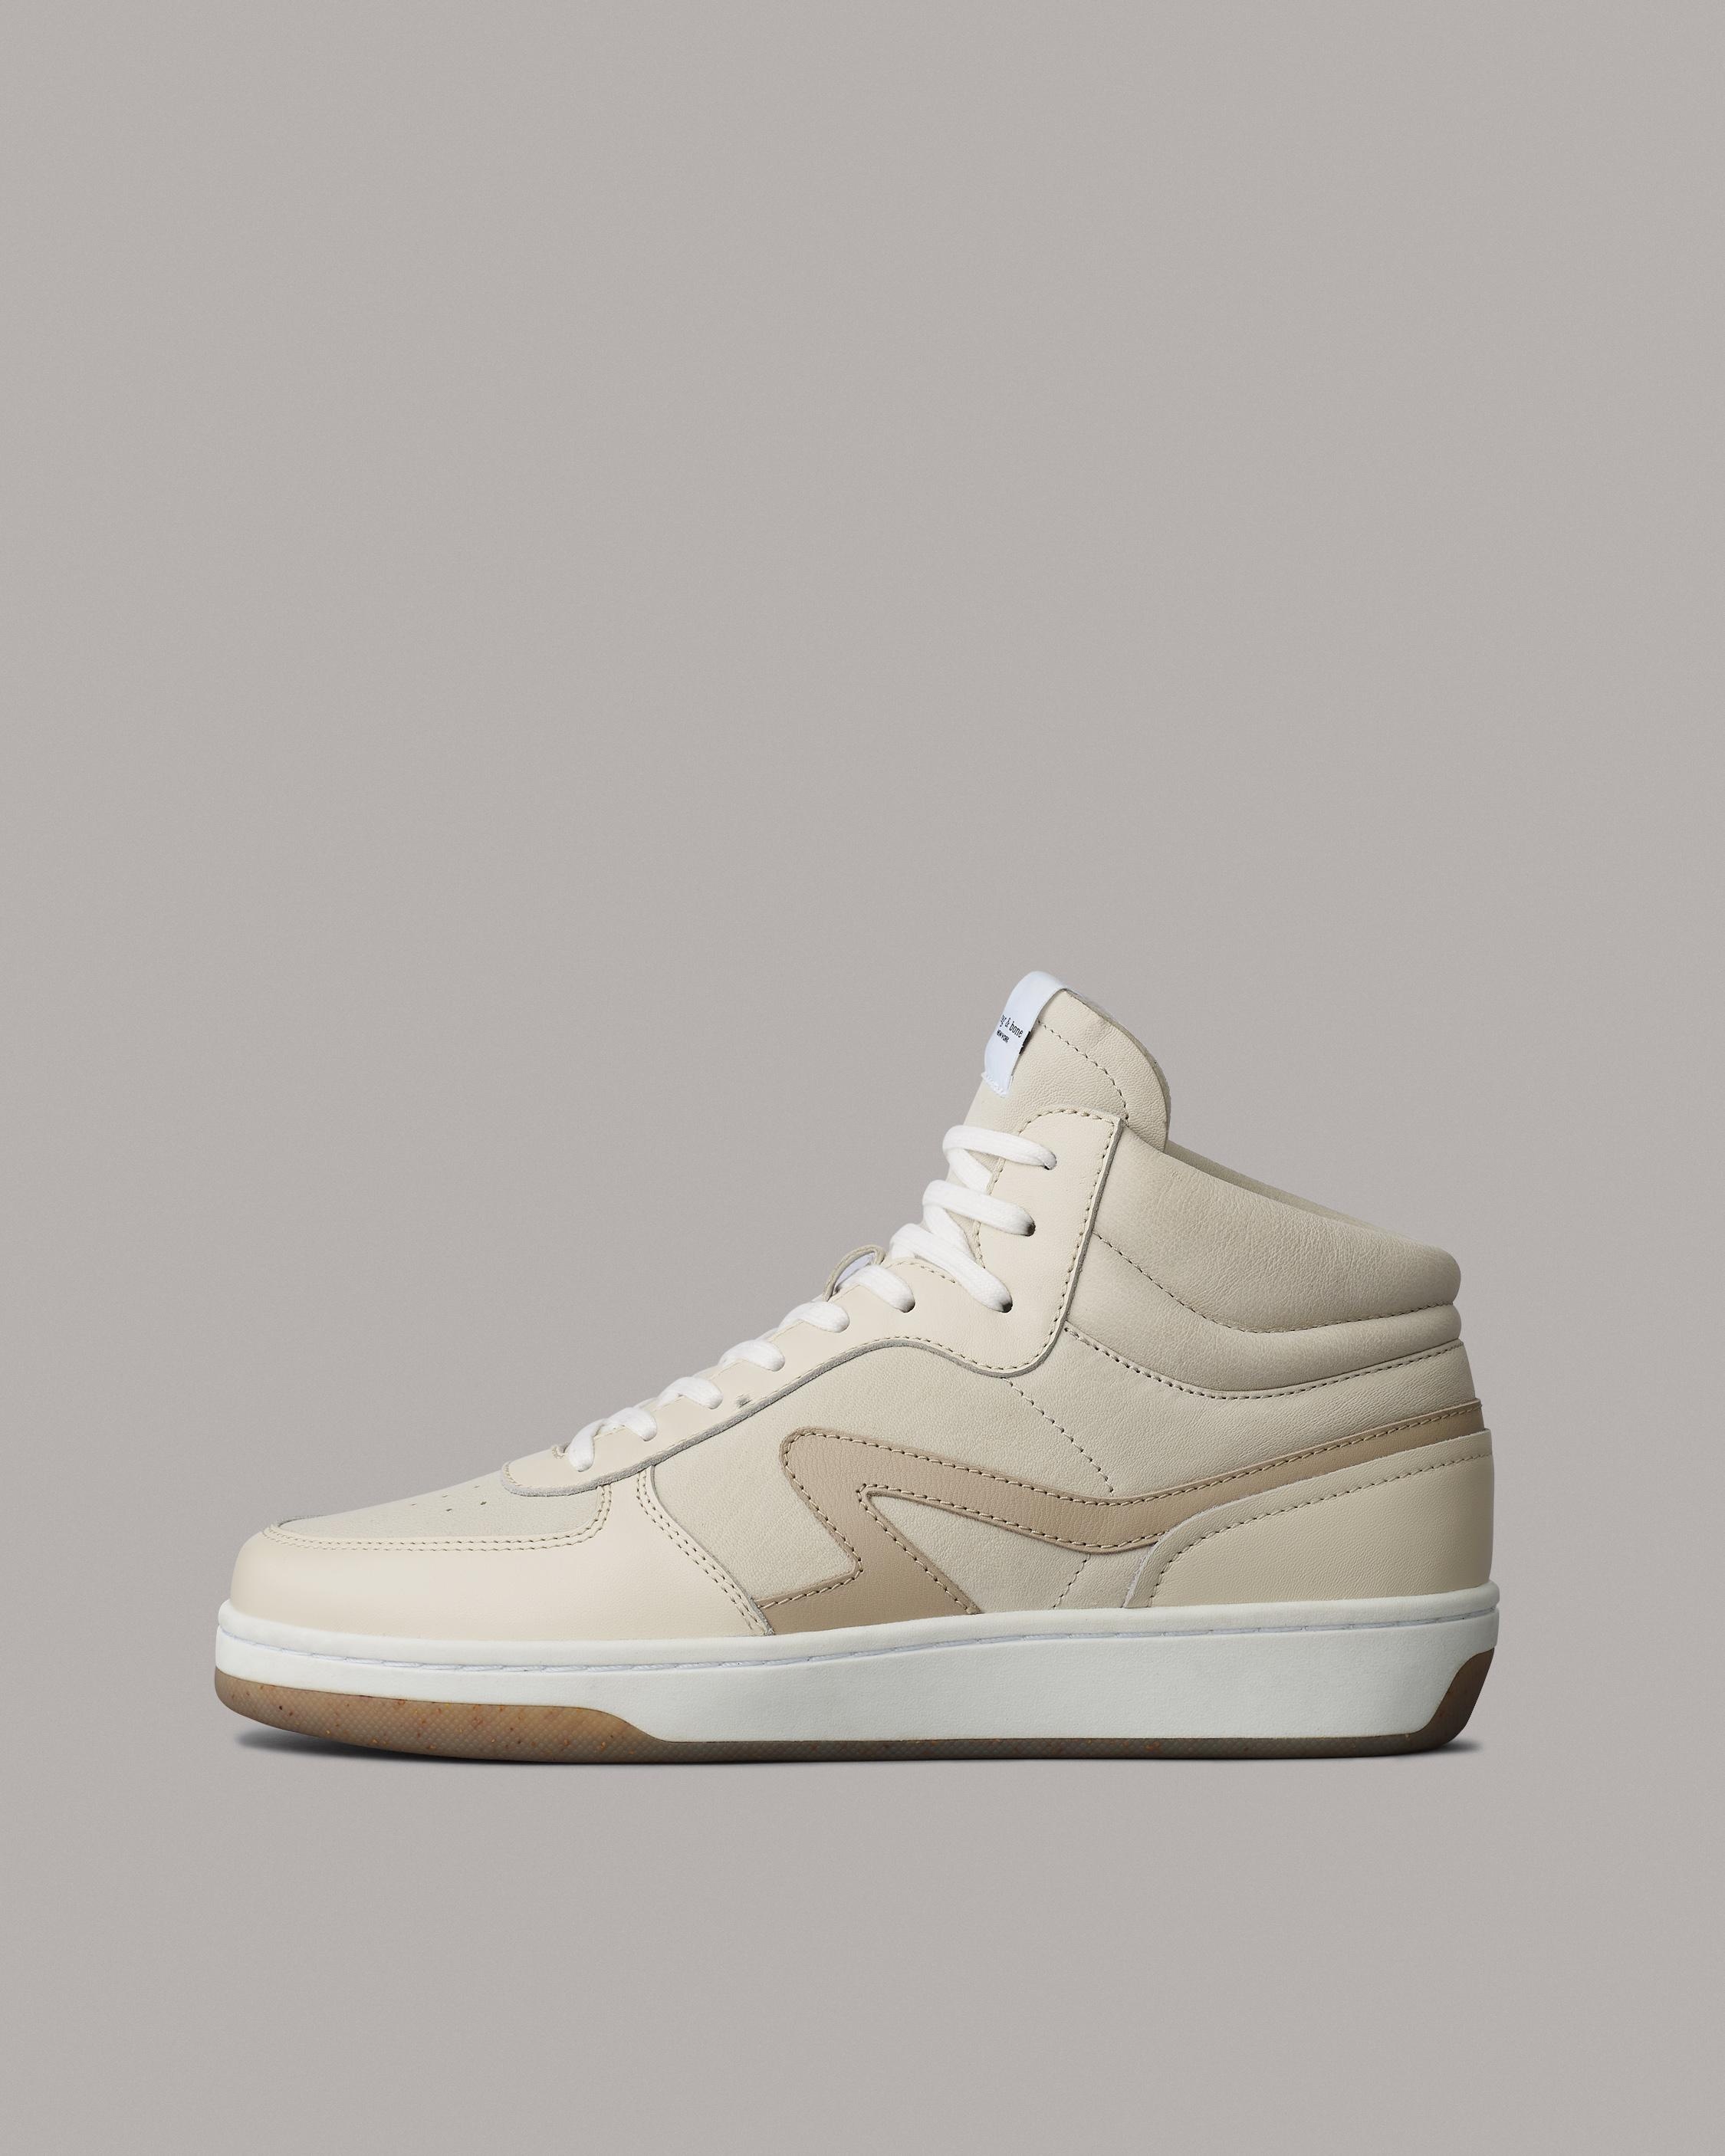 Retro Court Mid Sneaker - Leather
Mid Top Sneaker - 1